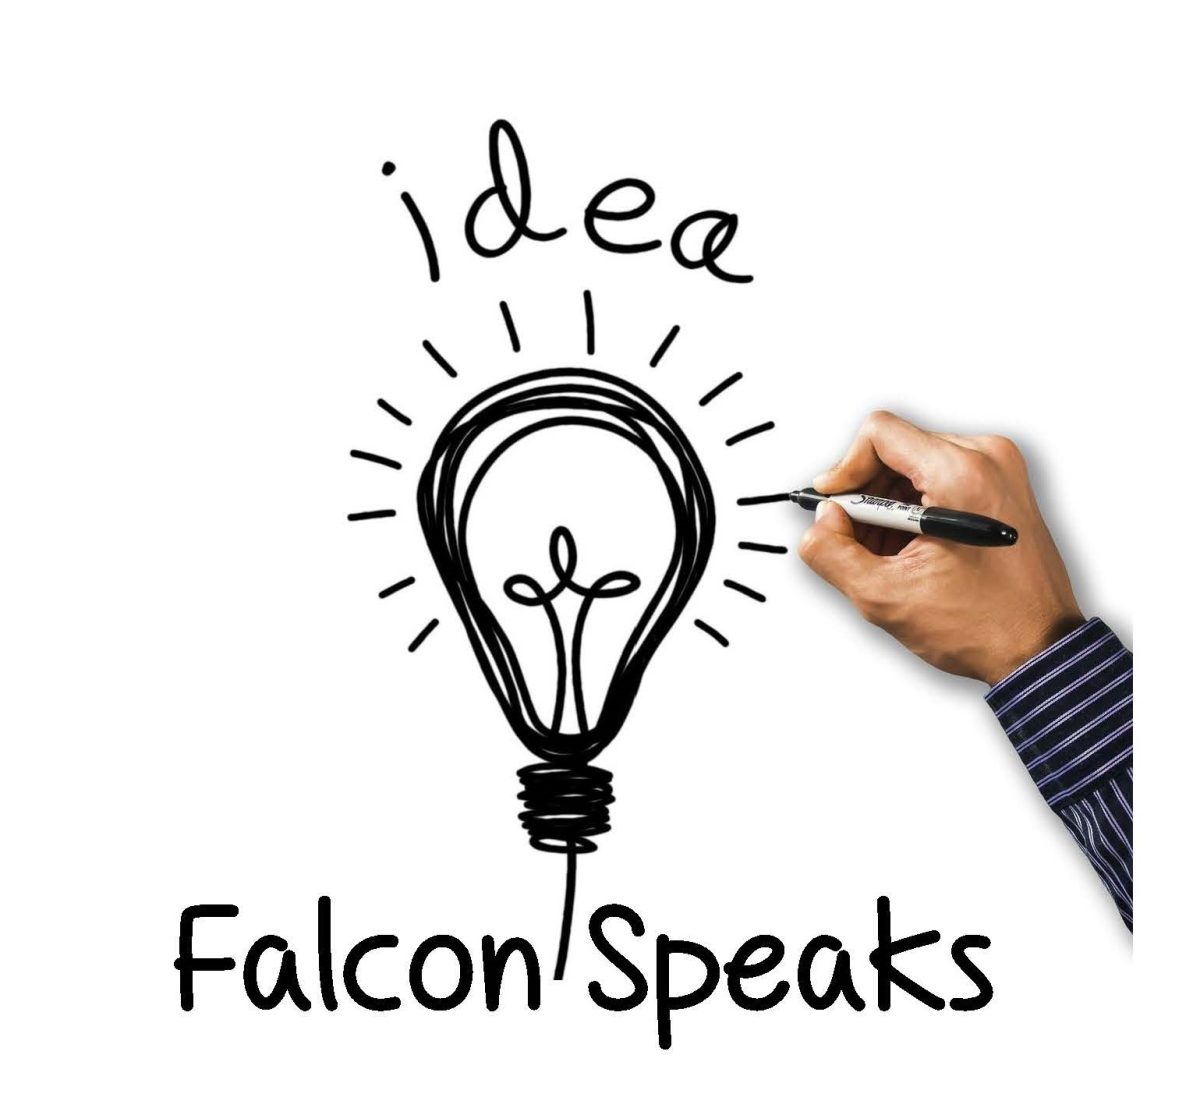 Falcon+Speaks+%233%3A+Don%E2%80%99t+Roll+the+Dice-+Get+Some+Sleep%21